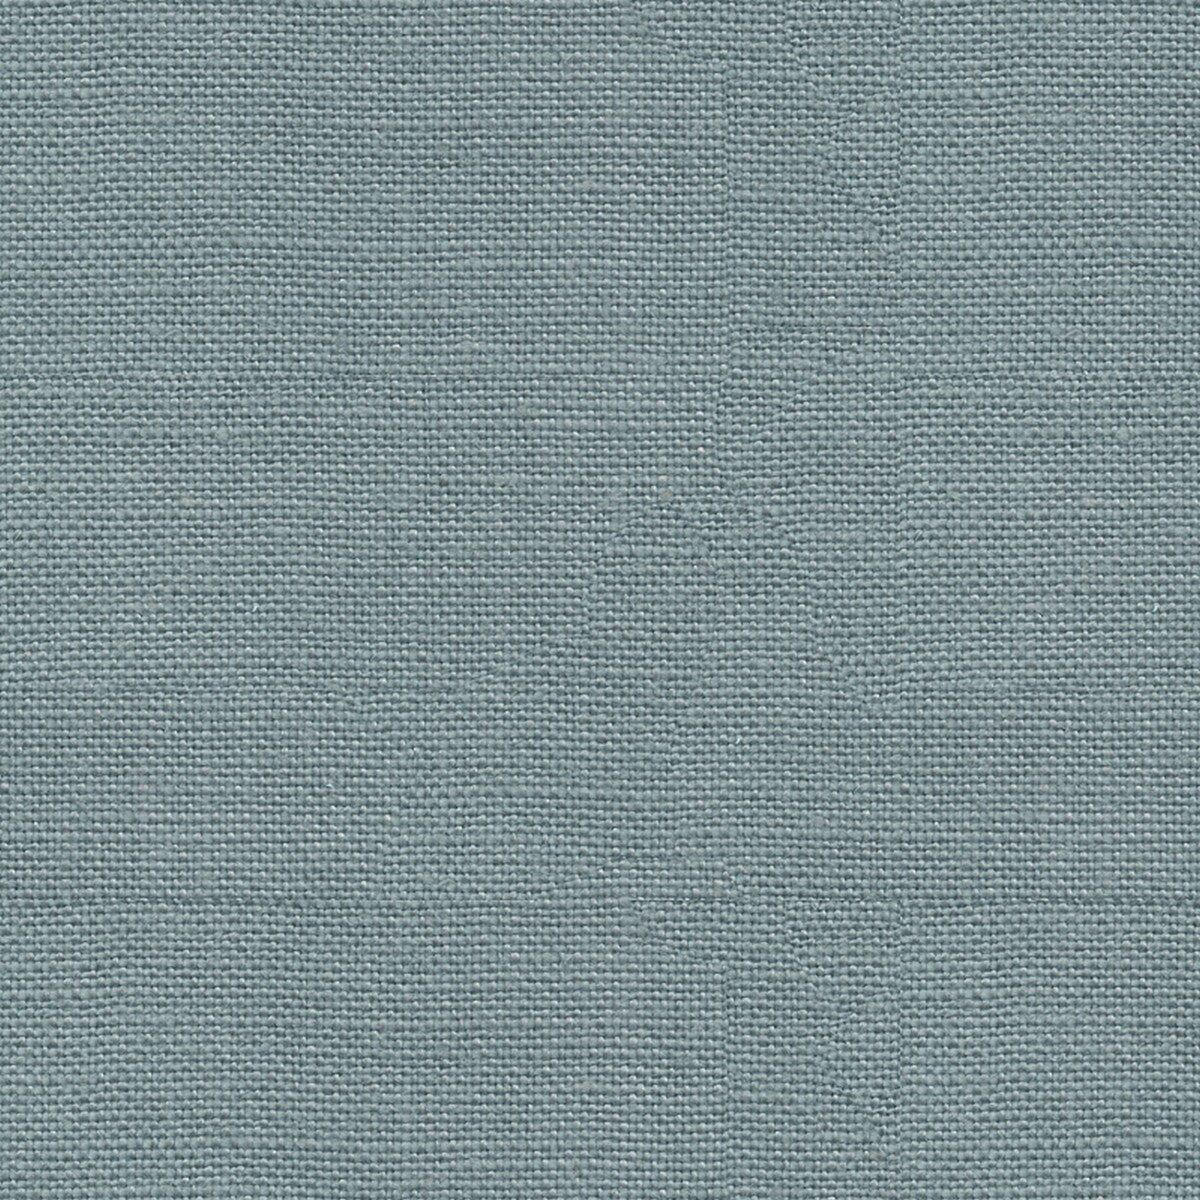 Weekend Linen fabric in aqua color - pattern FD698.R104.0 - by Mulberry in the Crayford collection